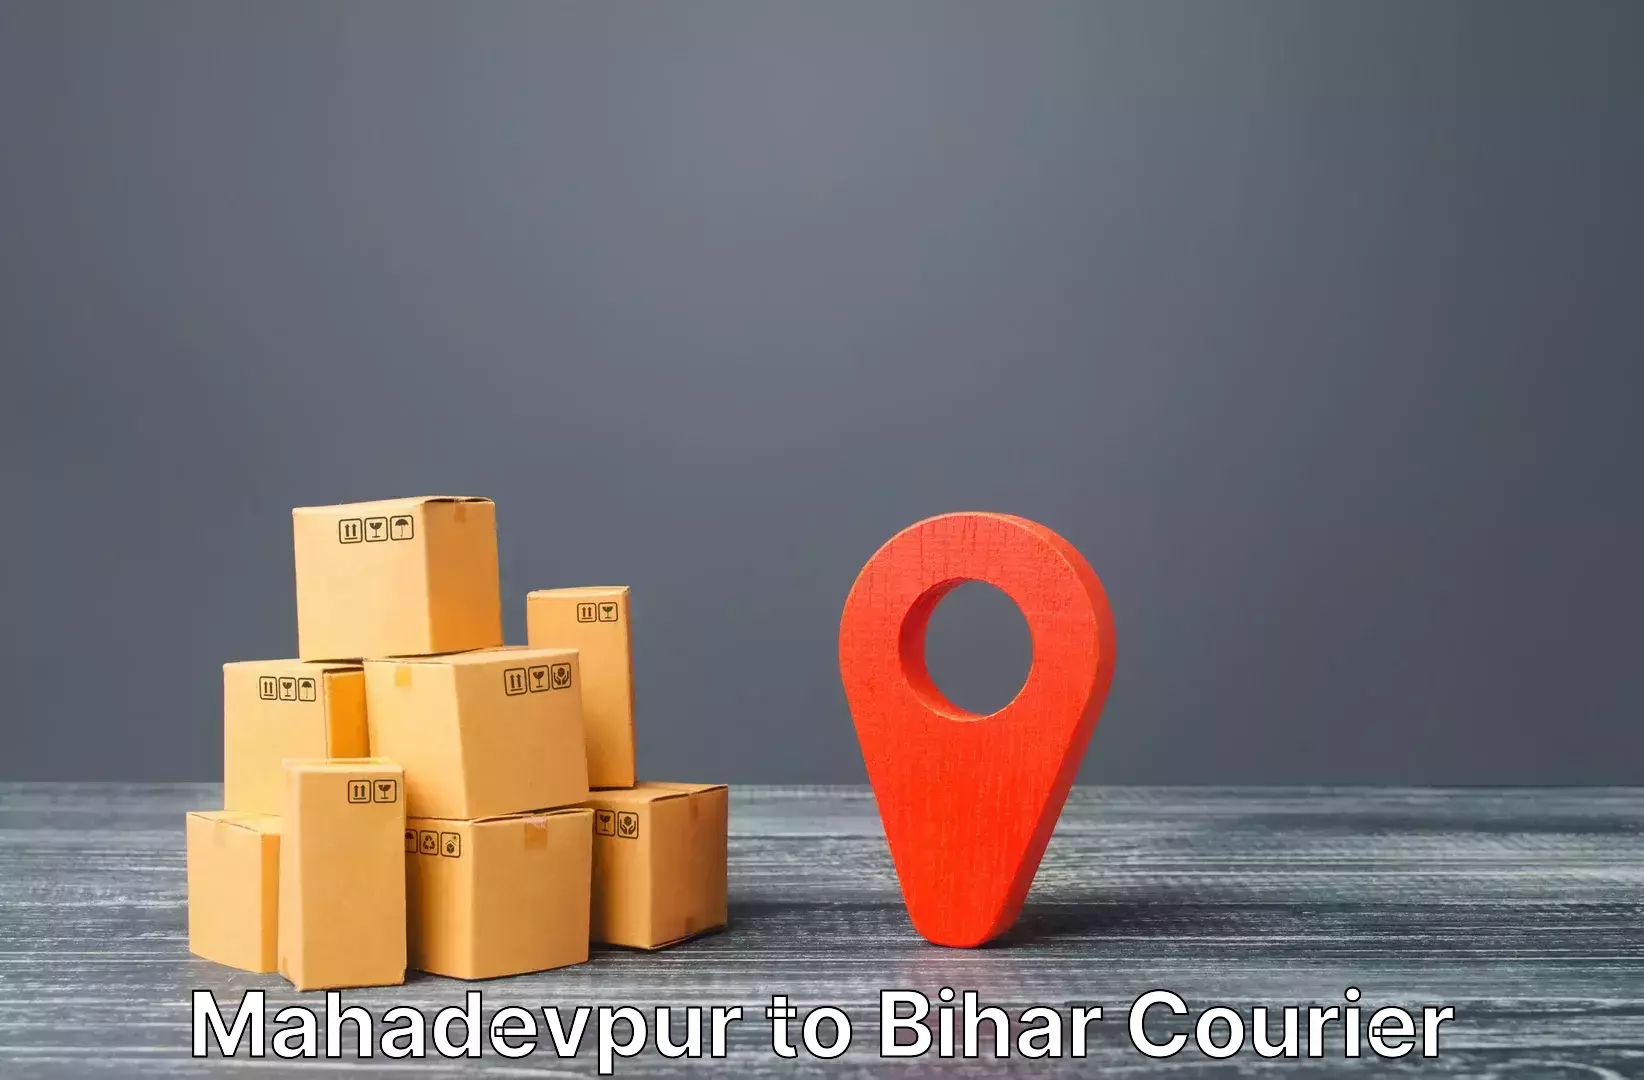 Baggage shipping service in Mahadevpur to Bankipore